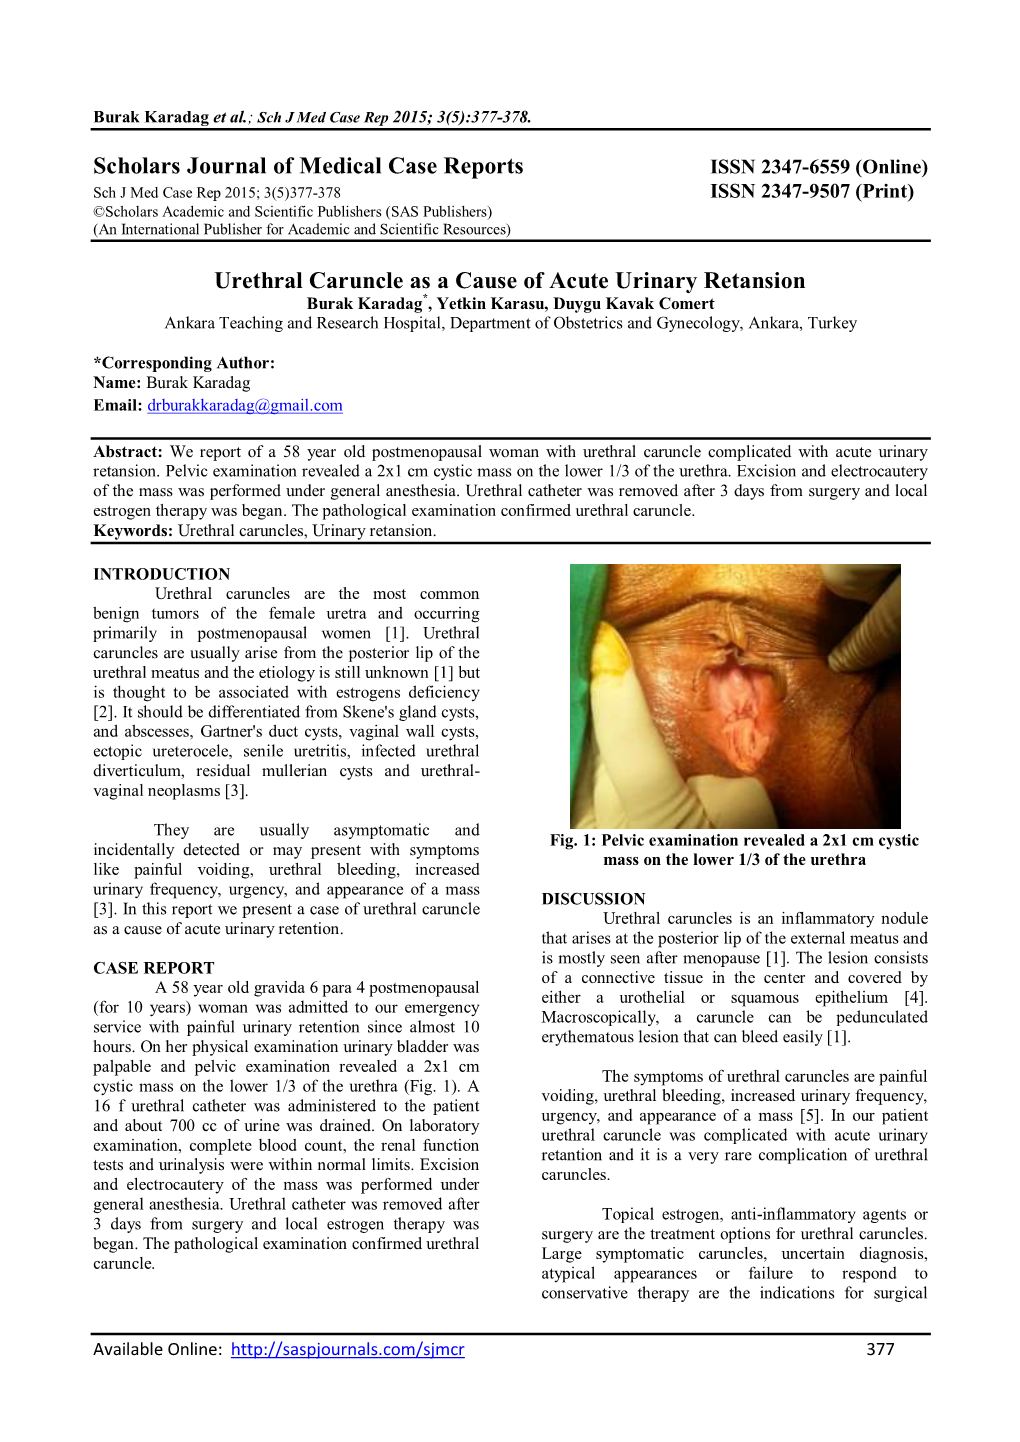 Scholars Journal of Medical Case Reports Urethral Caruncle As a Cause of Acute Urinary Retansion